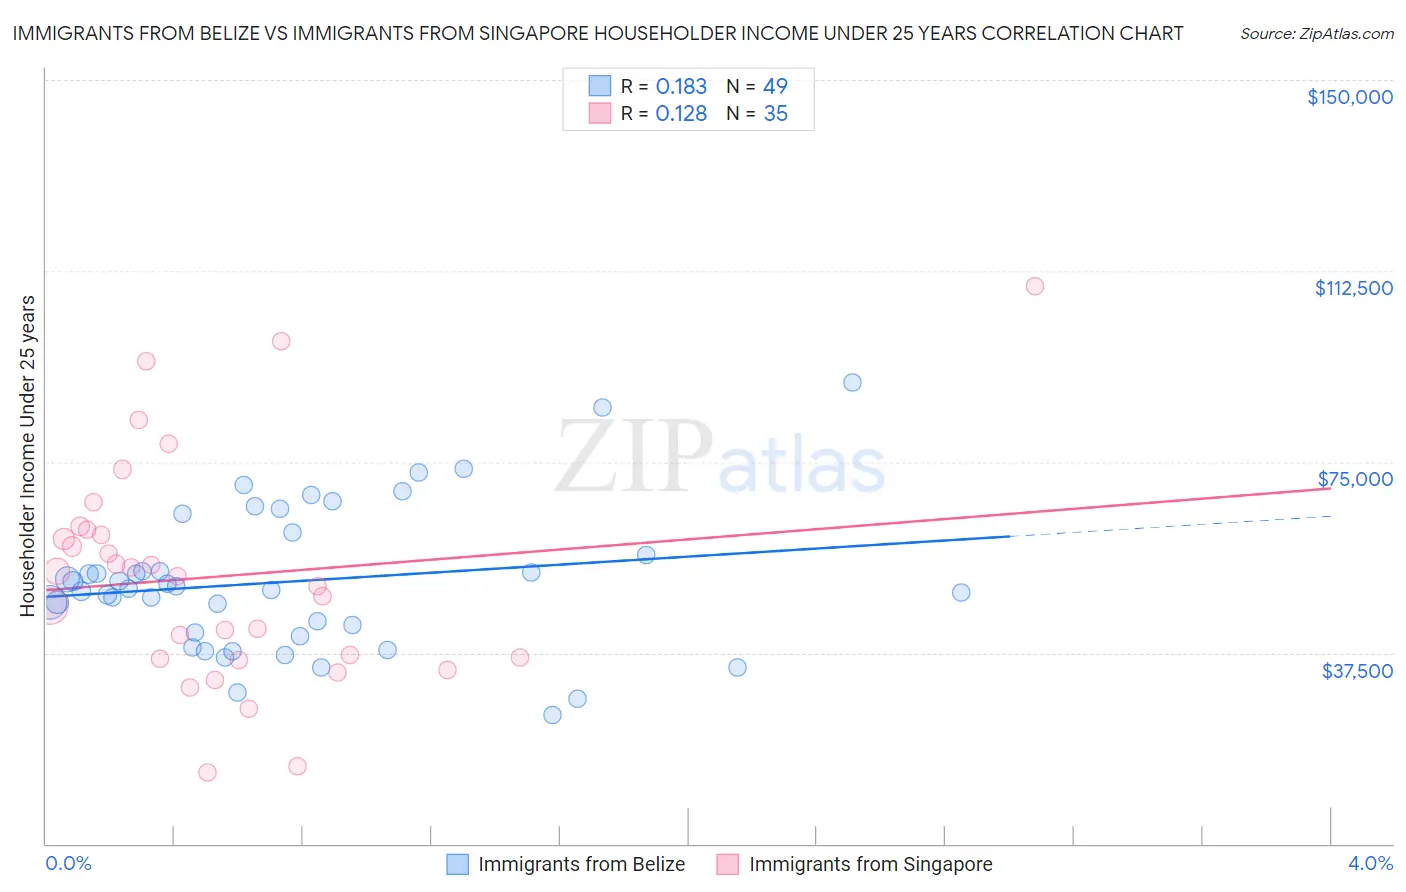 Immigrants from Belize vs Immigrants from Singapore Householder Income Under 25 years